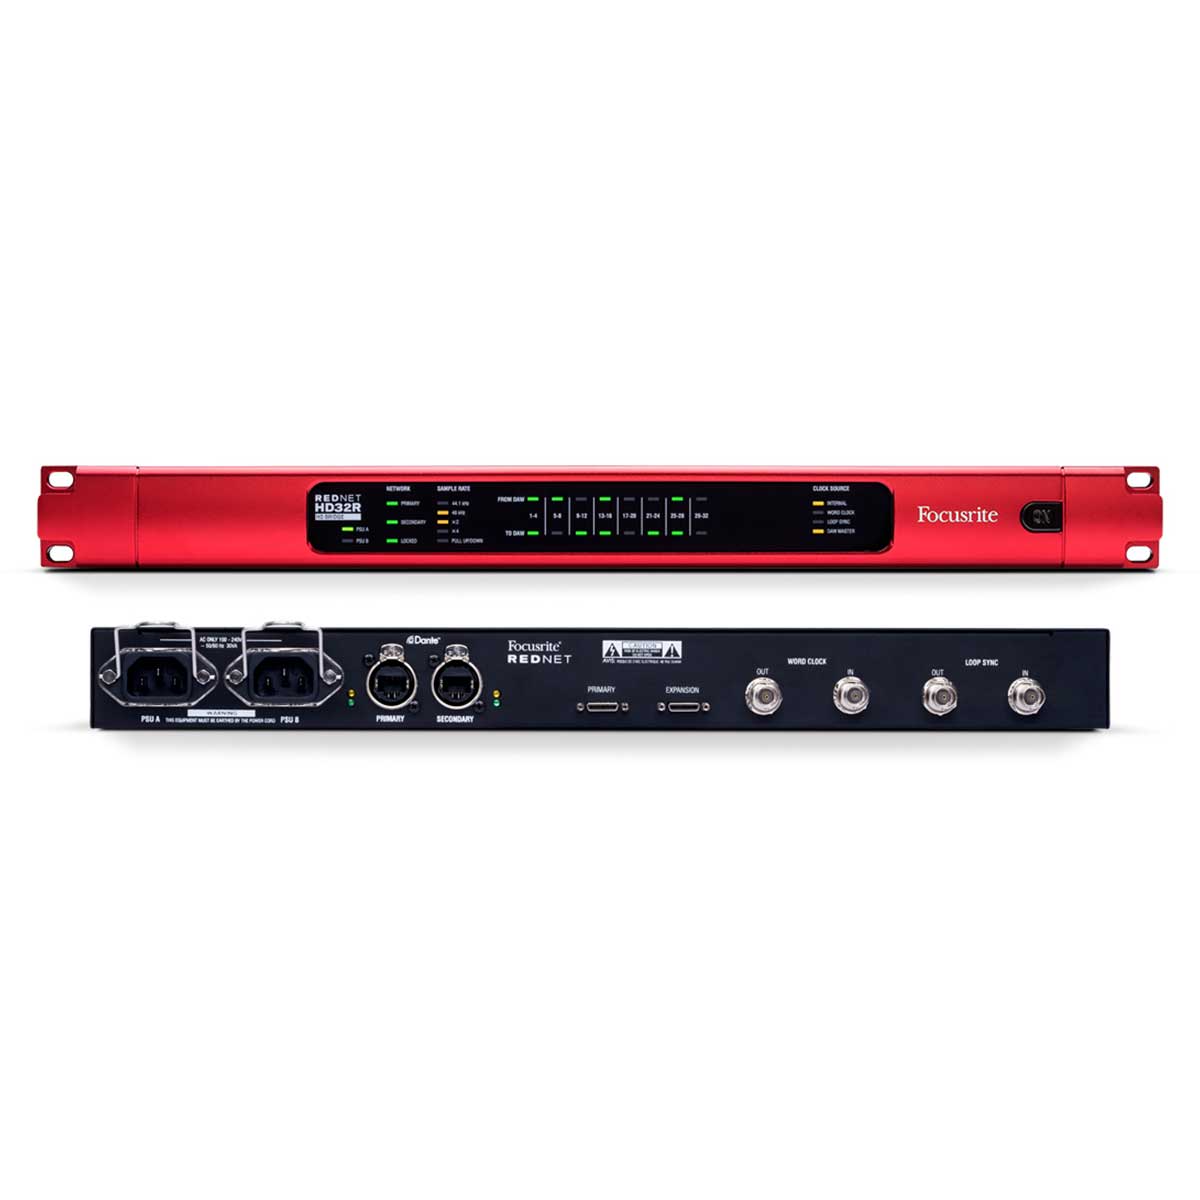 Focusrite HD32R 32 Channel Pro Tools|HD Dante I/O Interface with Redundant Network & Power